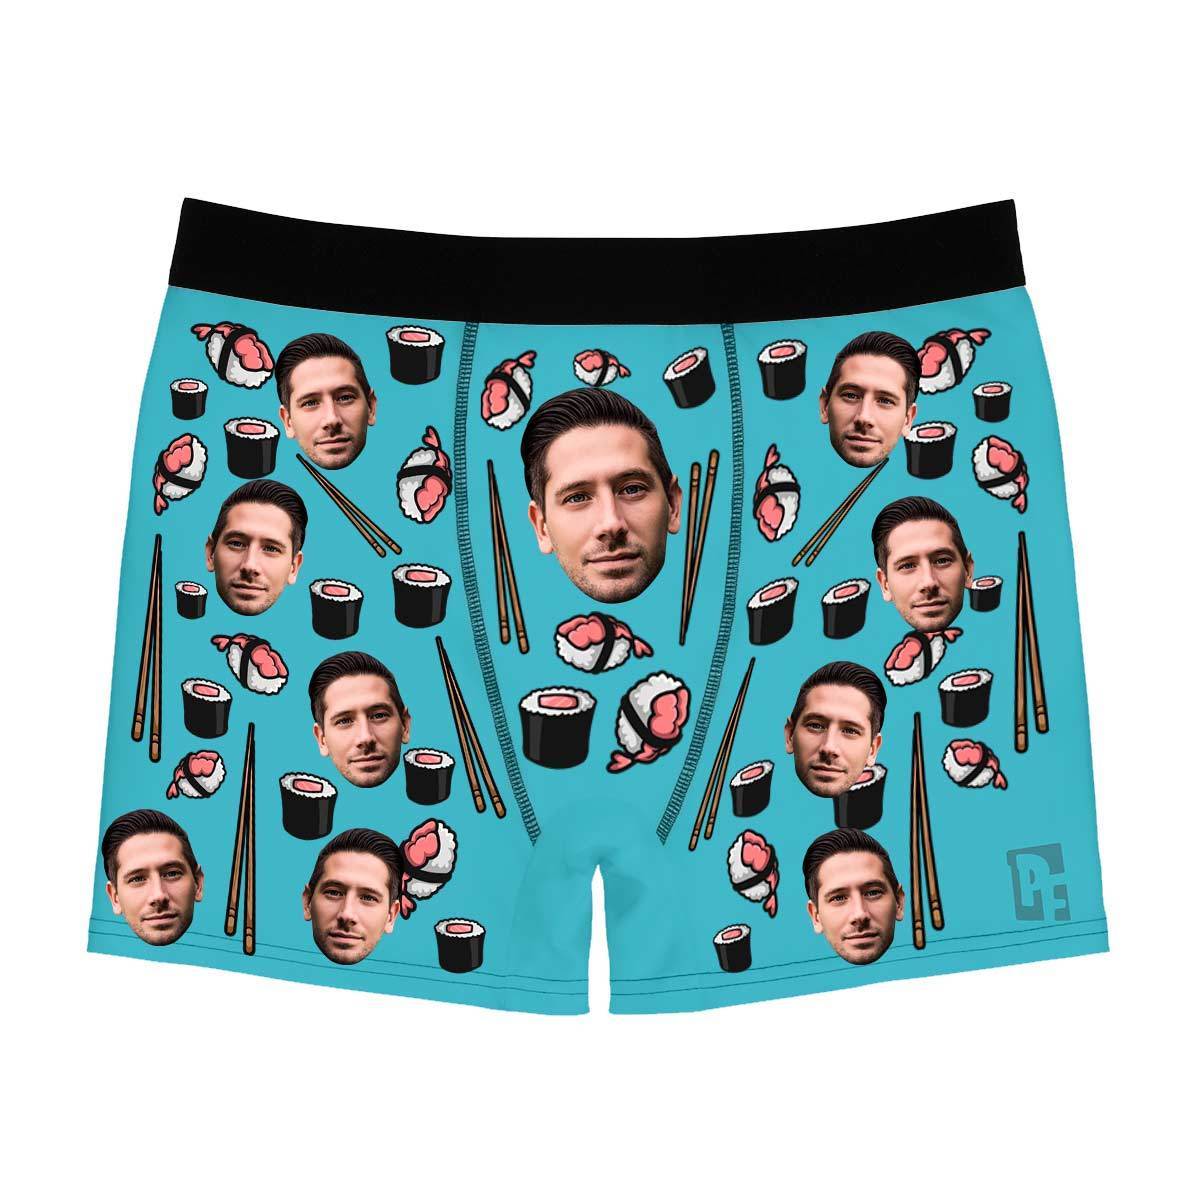 Blue Sushi men's boxer briefs personalized with photo printed on them